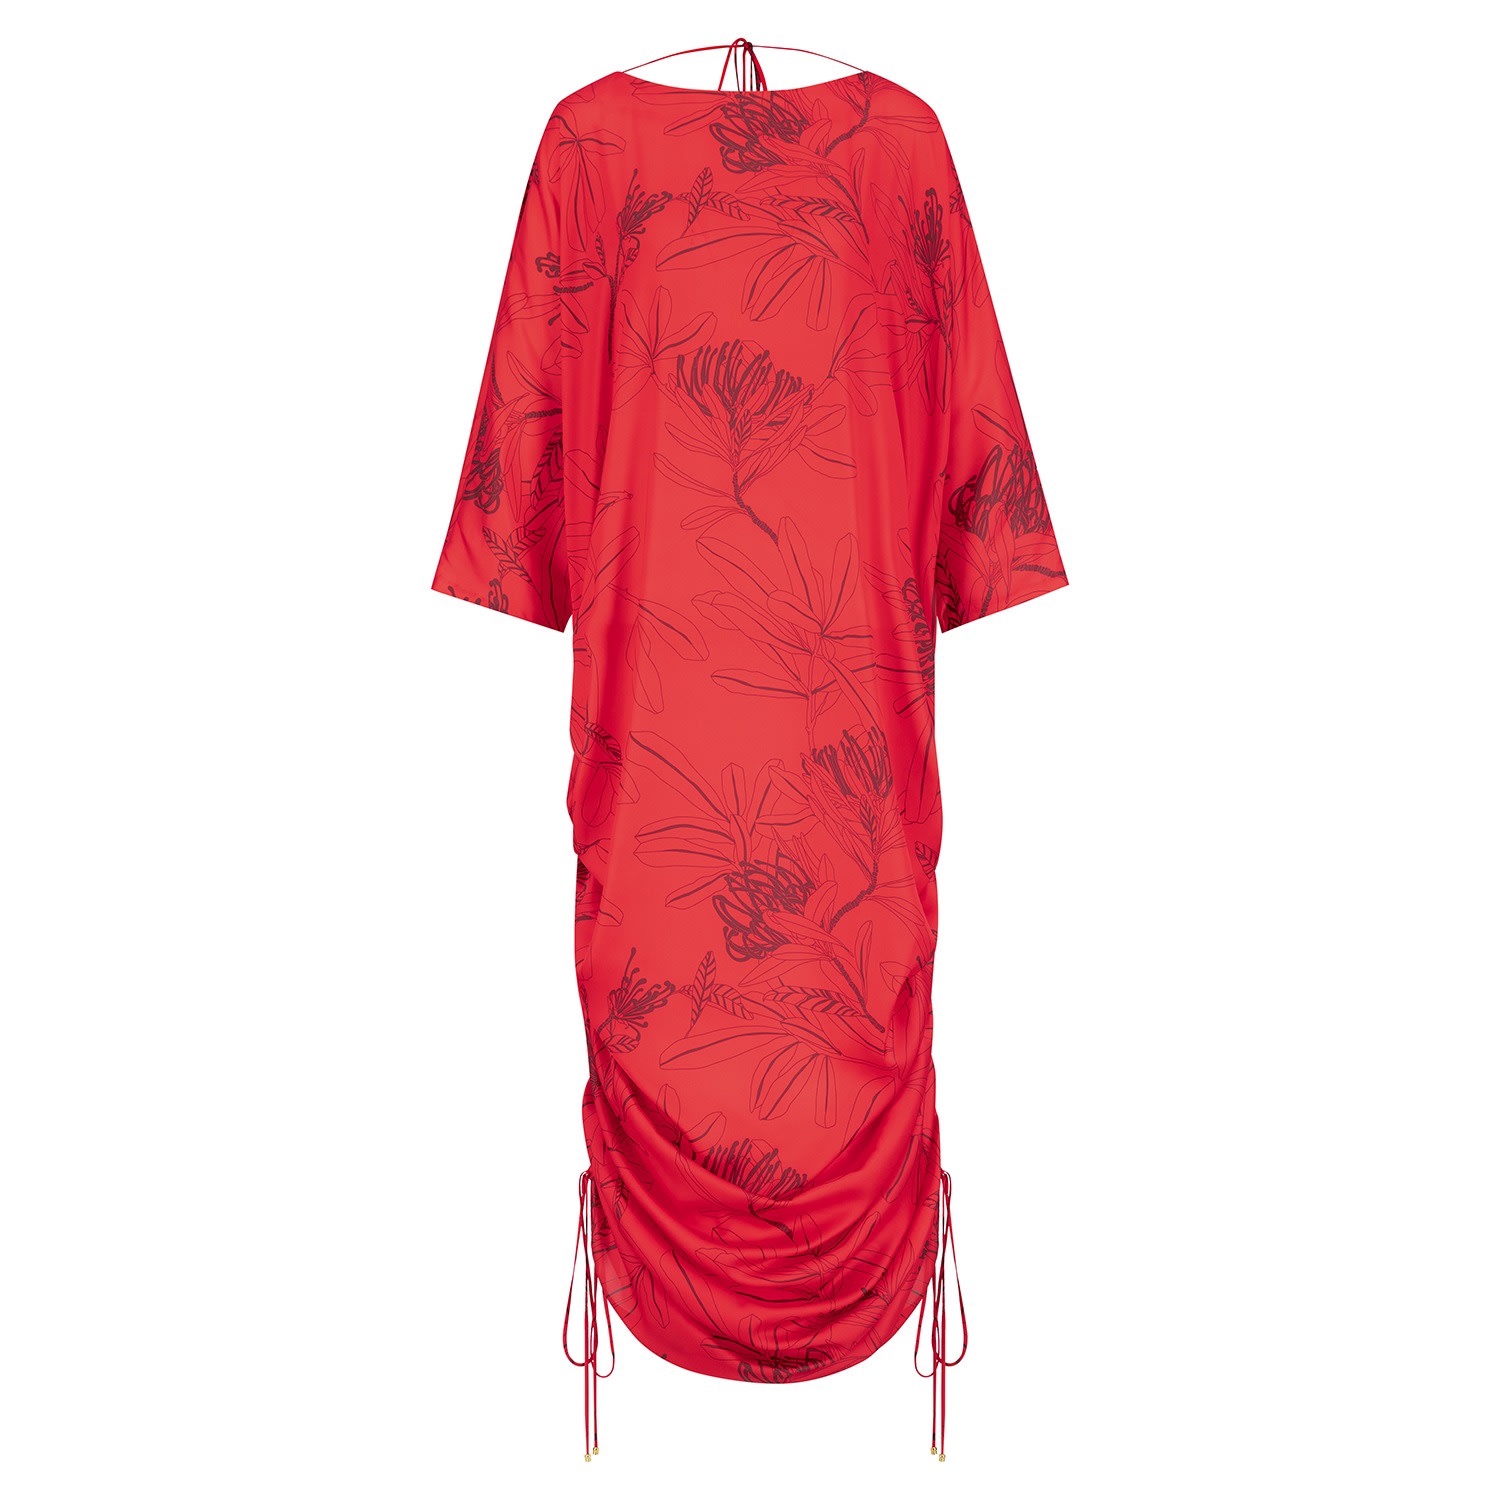 Women’s Pure Silk Kaftan With String Gathering On The Side Secured With Golden Metal Balls -Cherry Red Small Azzalia